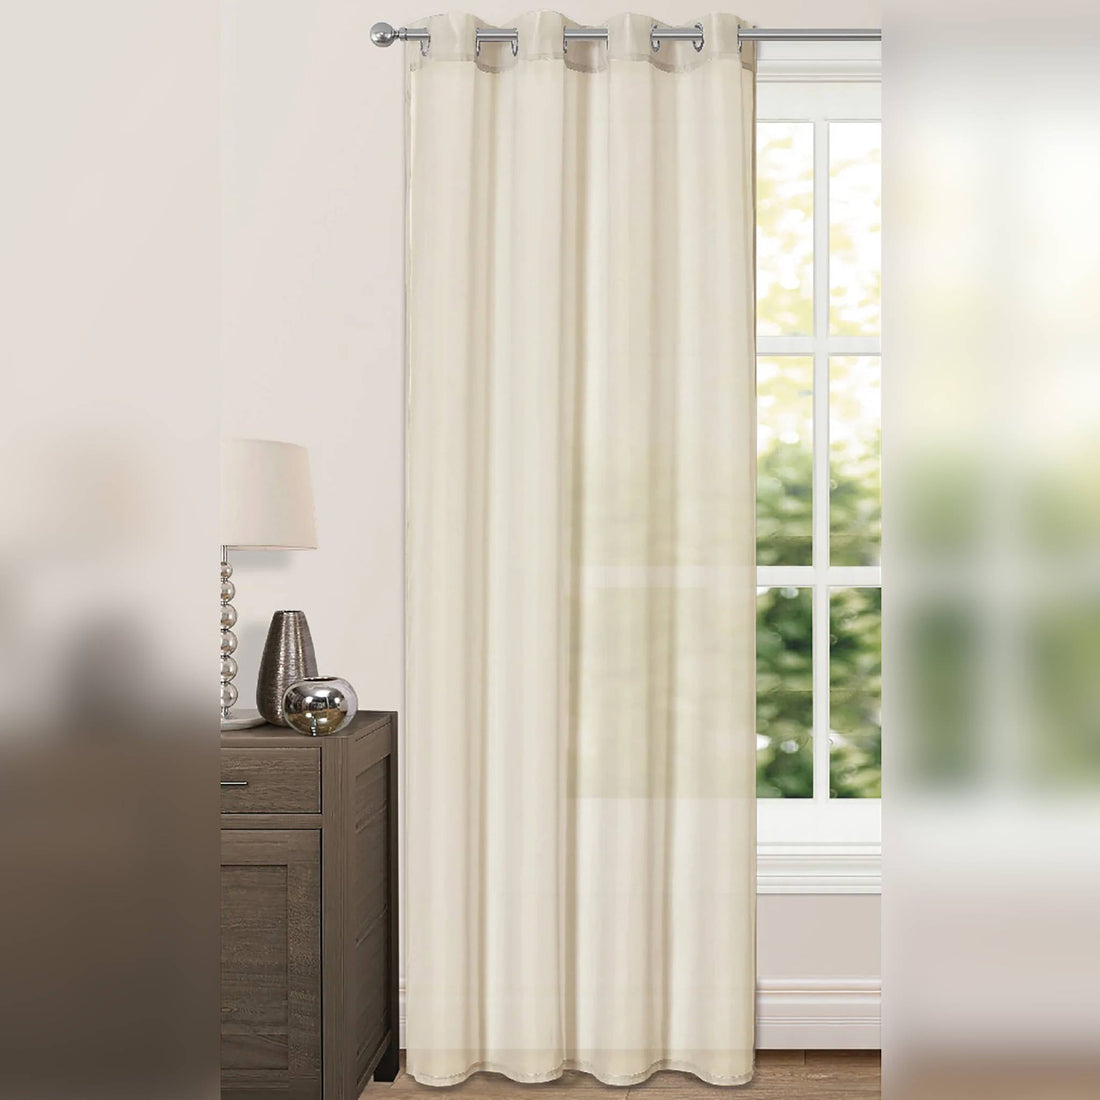 Intimates Riva Voile Panels Ring Top Eyelet Curtains | 59x72in